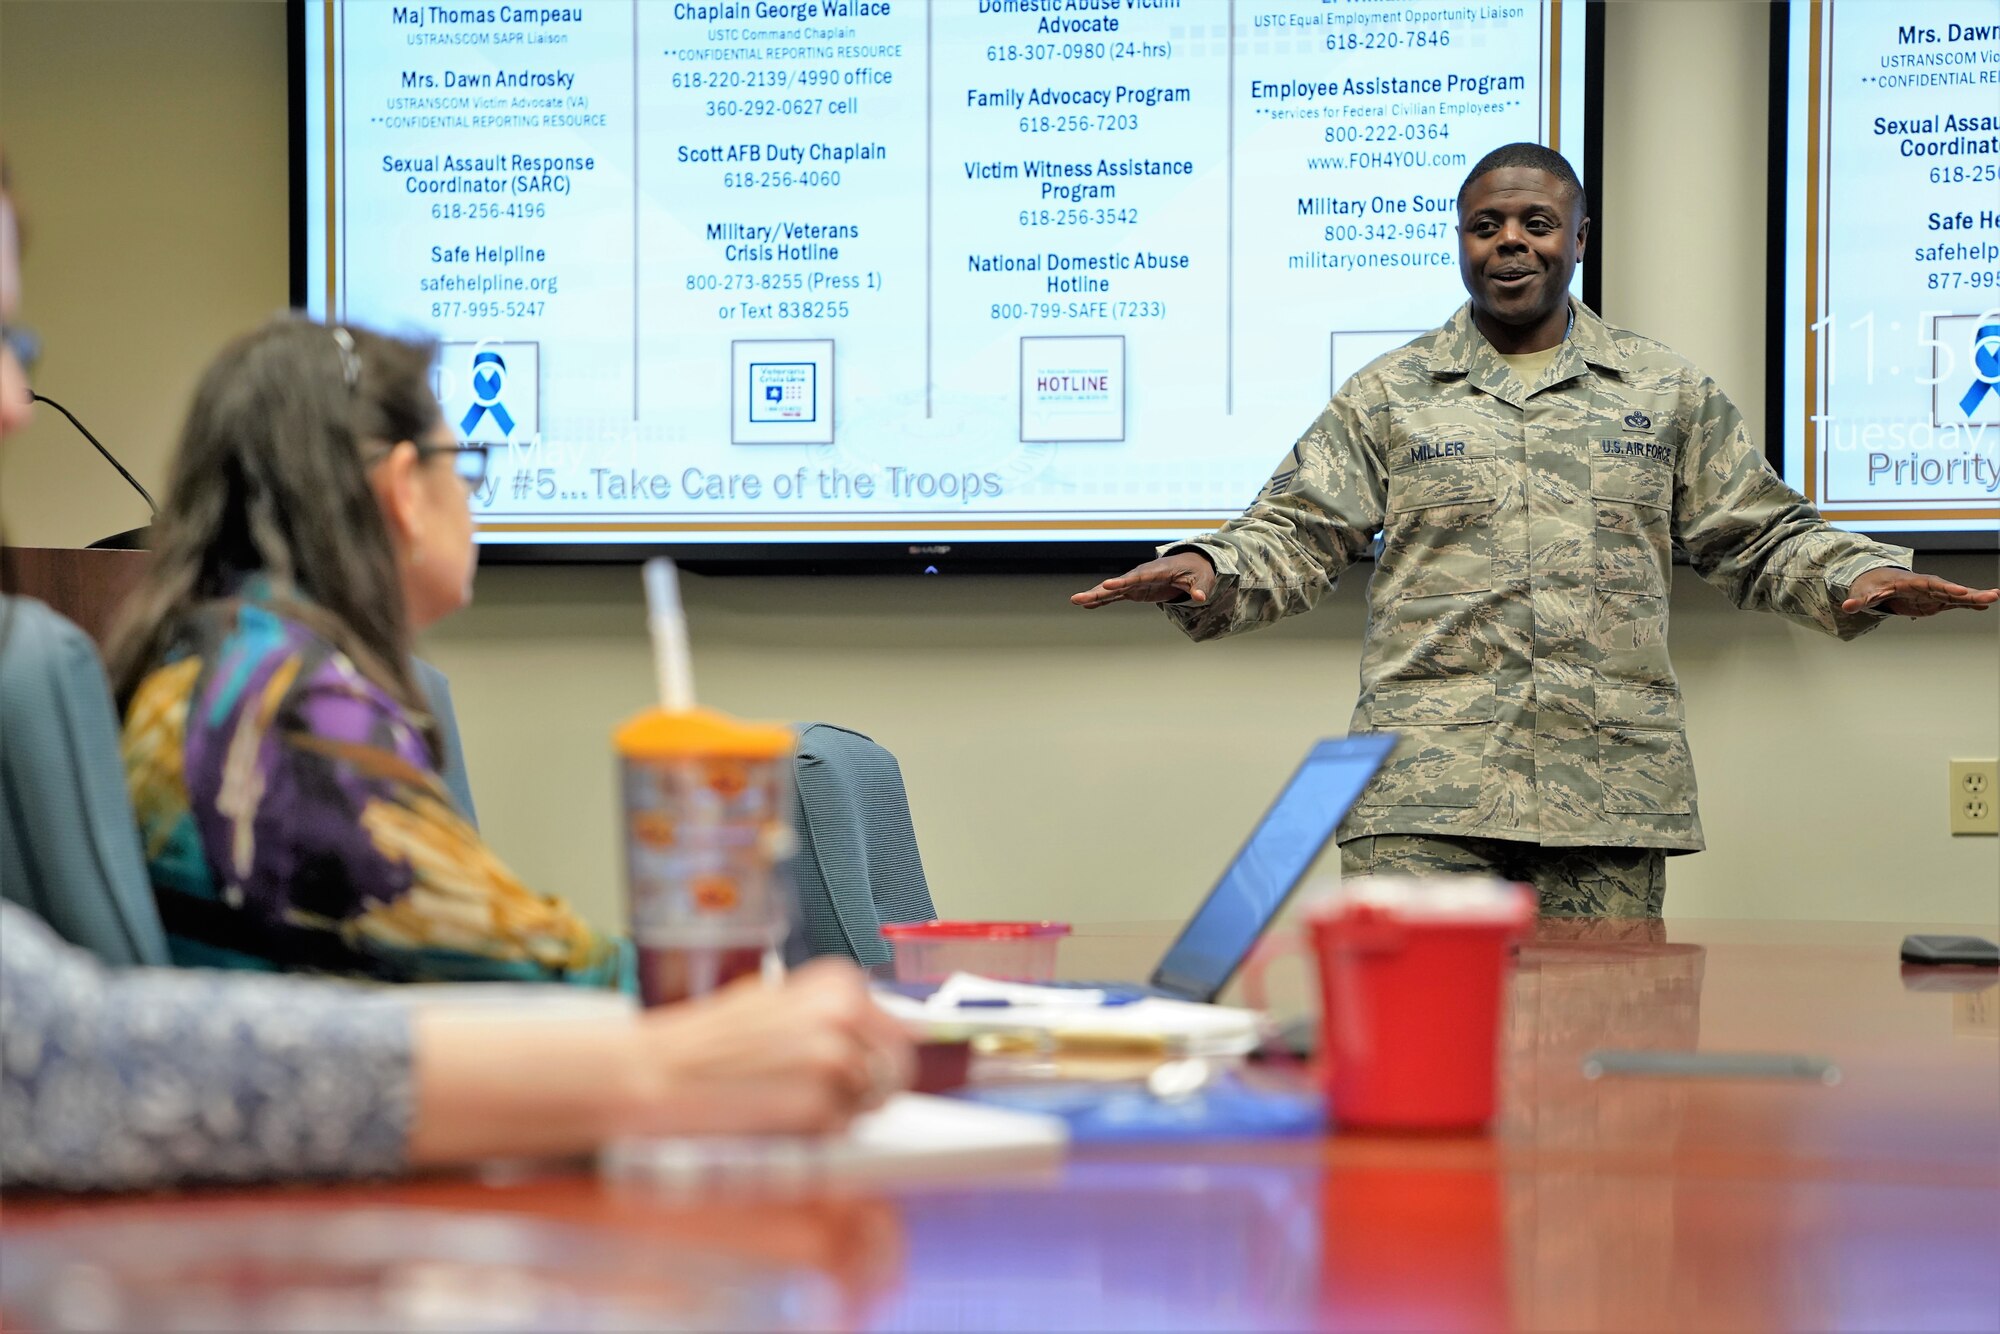 Master Sgt. Seth Miller, Community Support superintendent, 375th Air Mobility Wing, Scott AFB, Illinois, served as one of the presenters during the U.S. Transportation Command-sponsored resiliency seminar, May 21, 2019.  A certified master resilience trainer, Miller discussed persevering through big and small adversities.